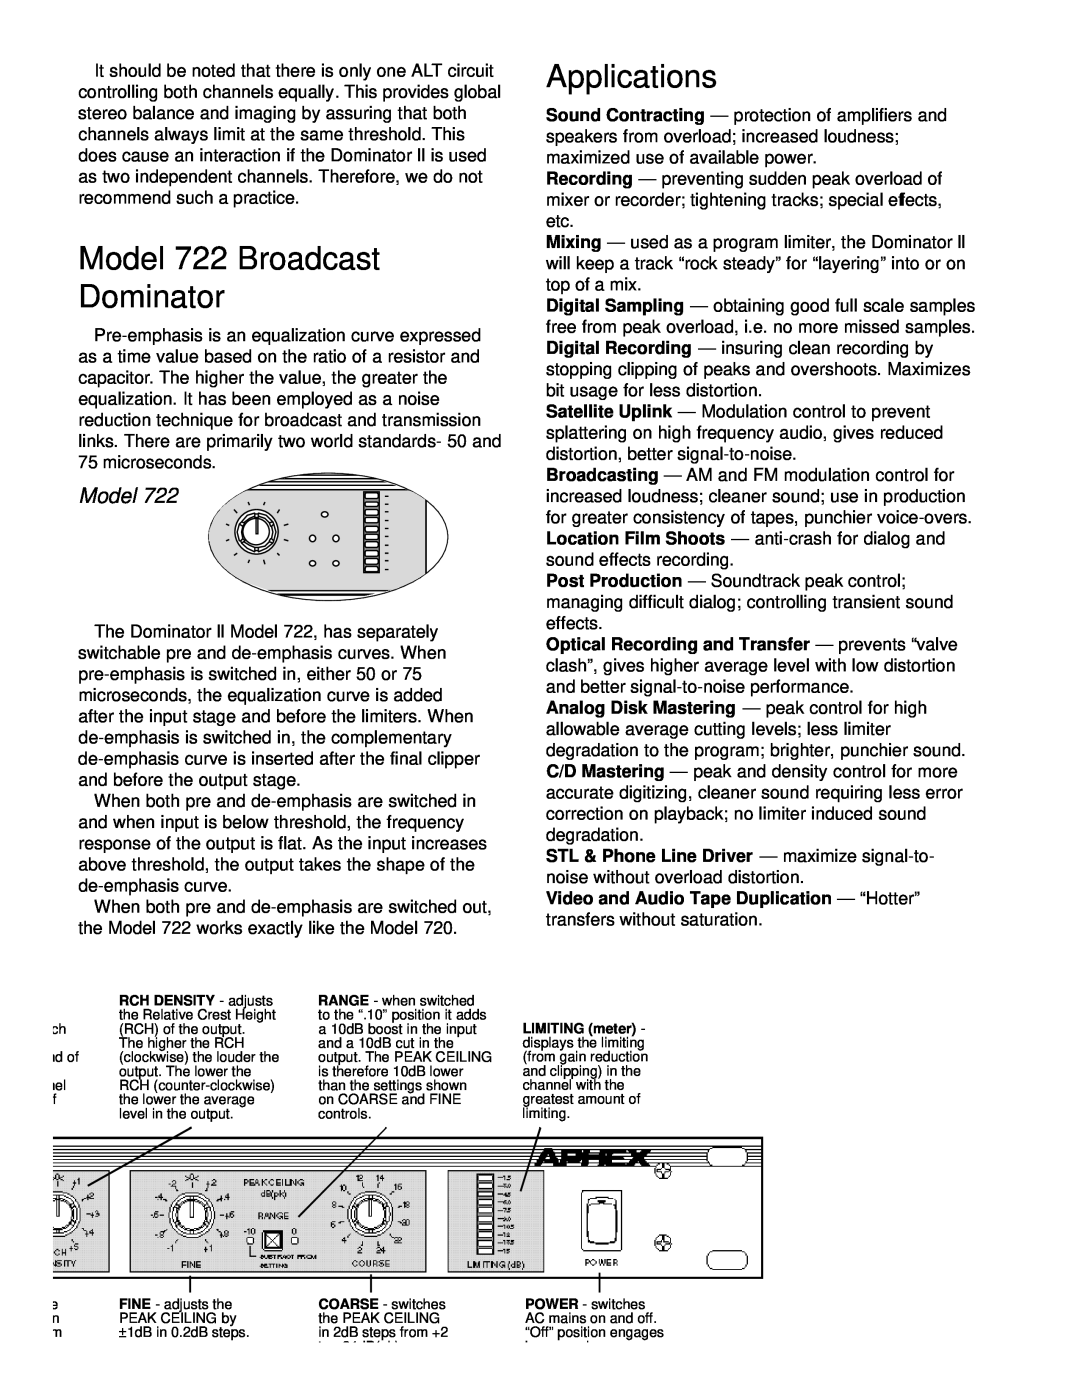 Aphex Systems 720 manual Model 722 Broadcast Dominator, Applications, STL & Phone Line Driver - maximize signal-to 